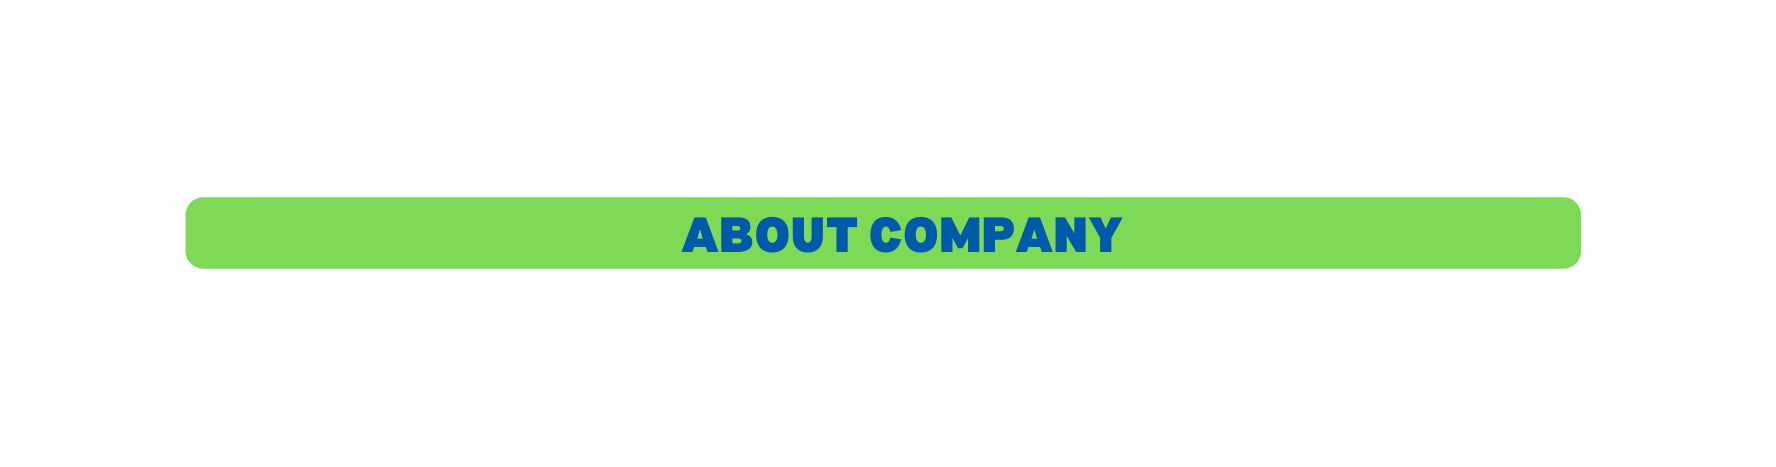 about company